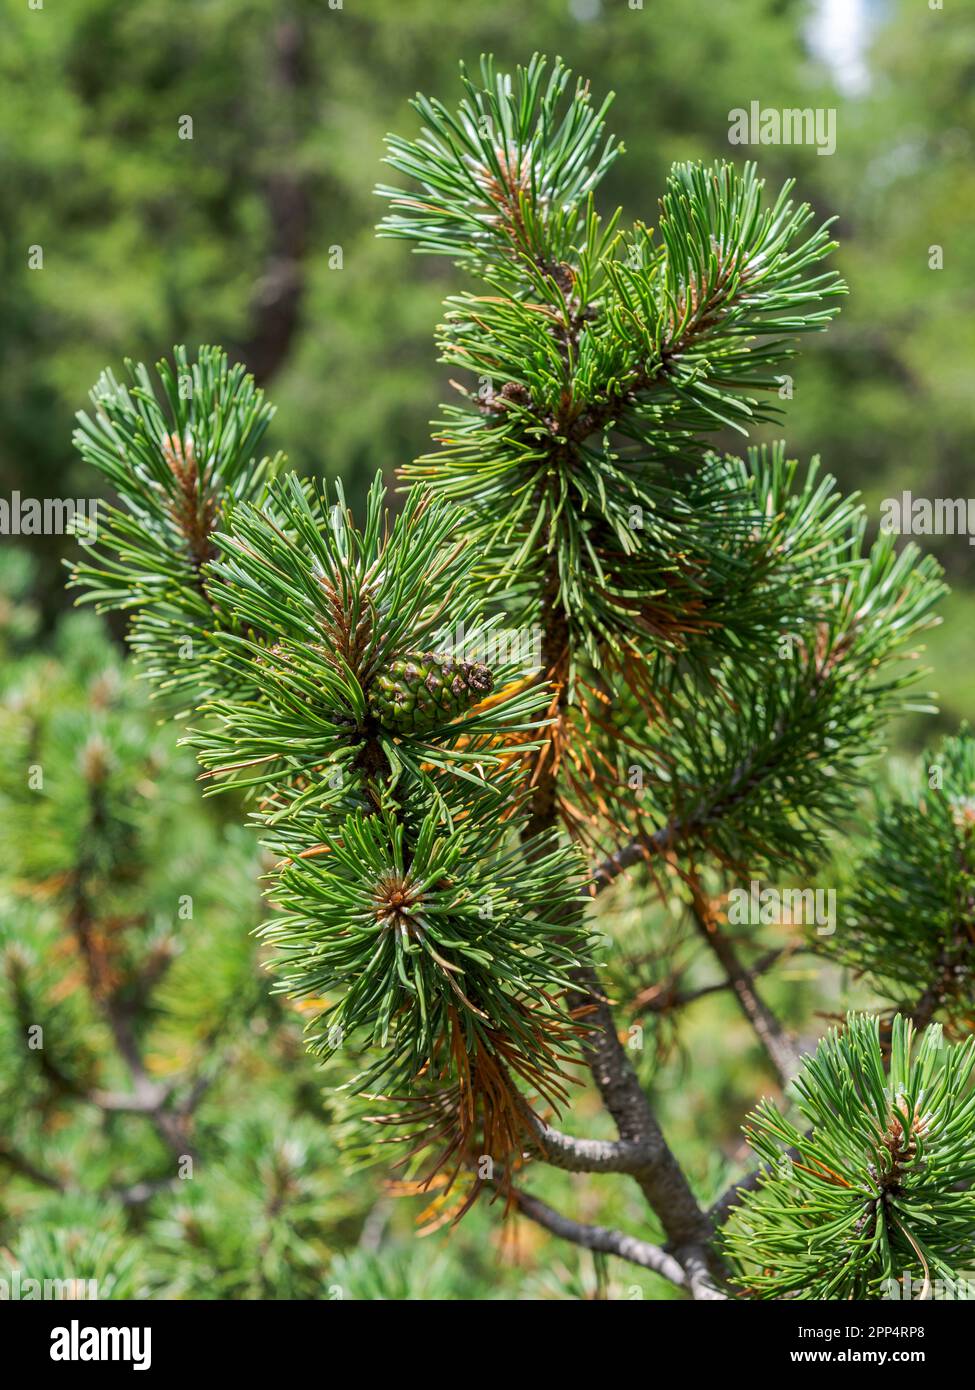 Detail of leaves, branches and cones of Dwarf Mountain pine, Pinus mugo. Photo taken in the Mieming Range, State of Tyrol, Austria. Stock Photo